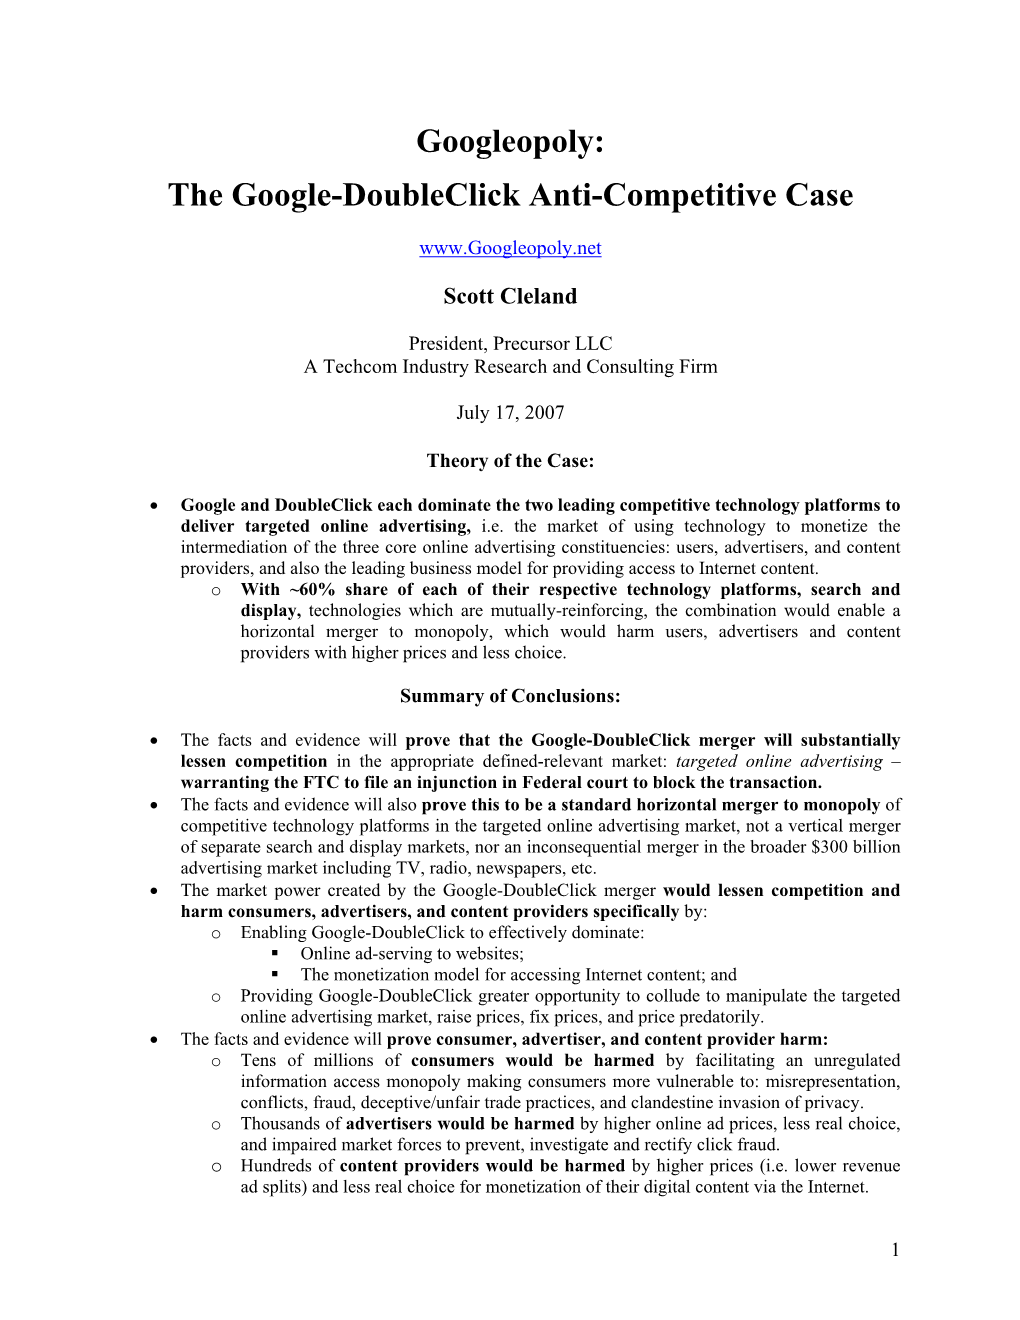 The Google-Doubleclick Anti-Competitive Case